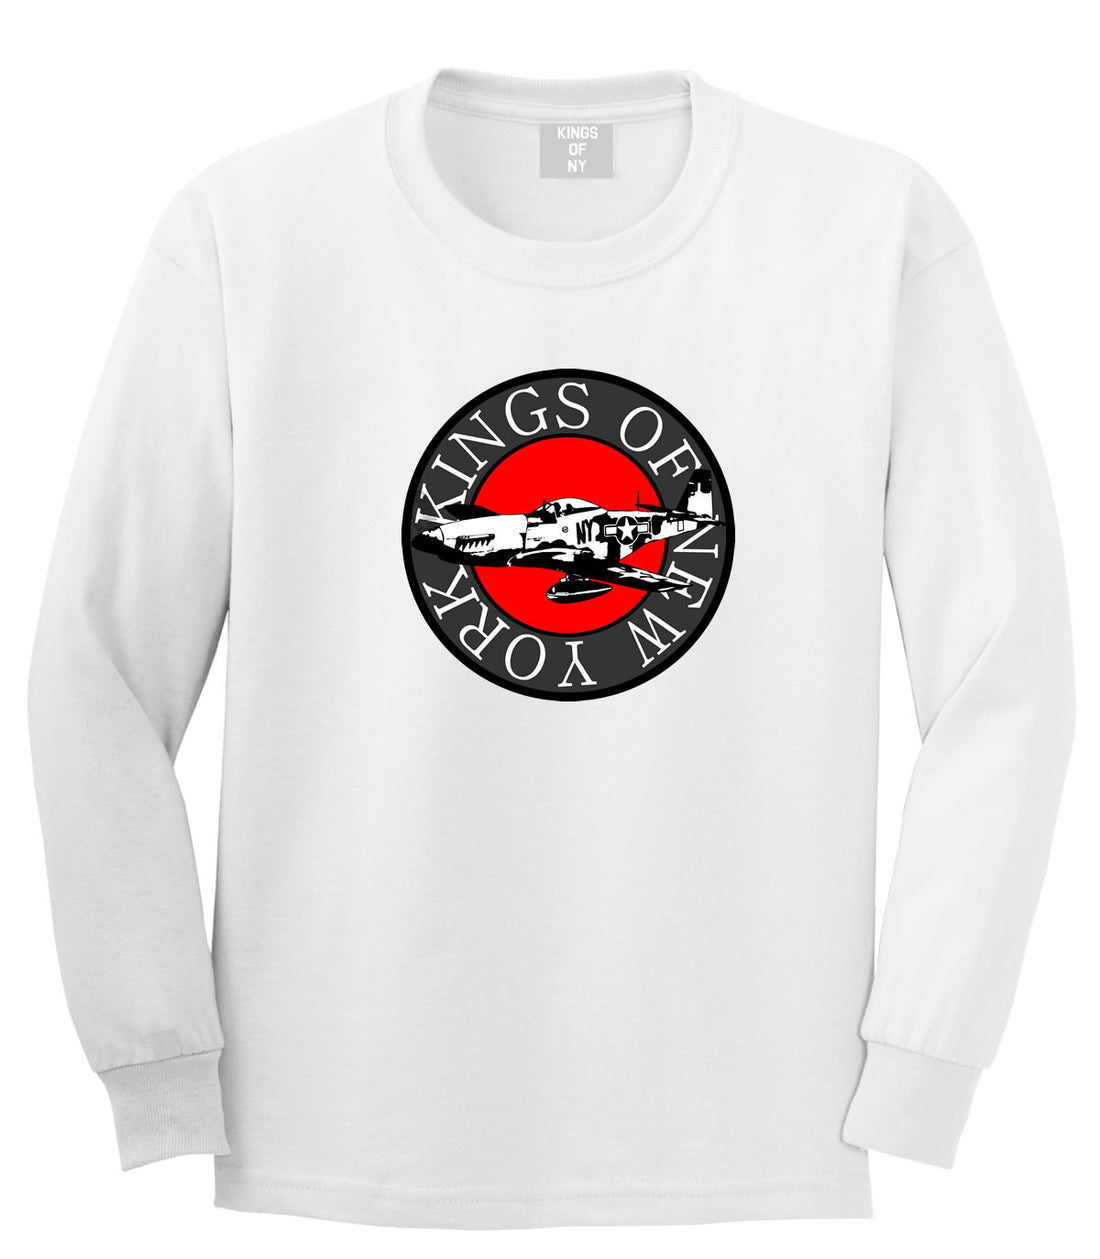 Kings Of NY Airplane World War Long Sleeve T-Shirt in White